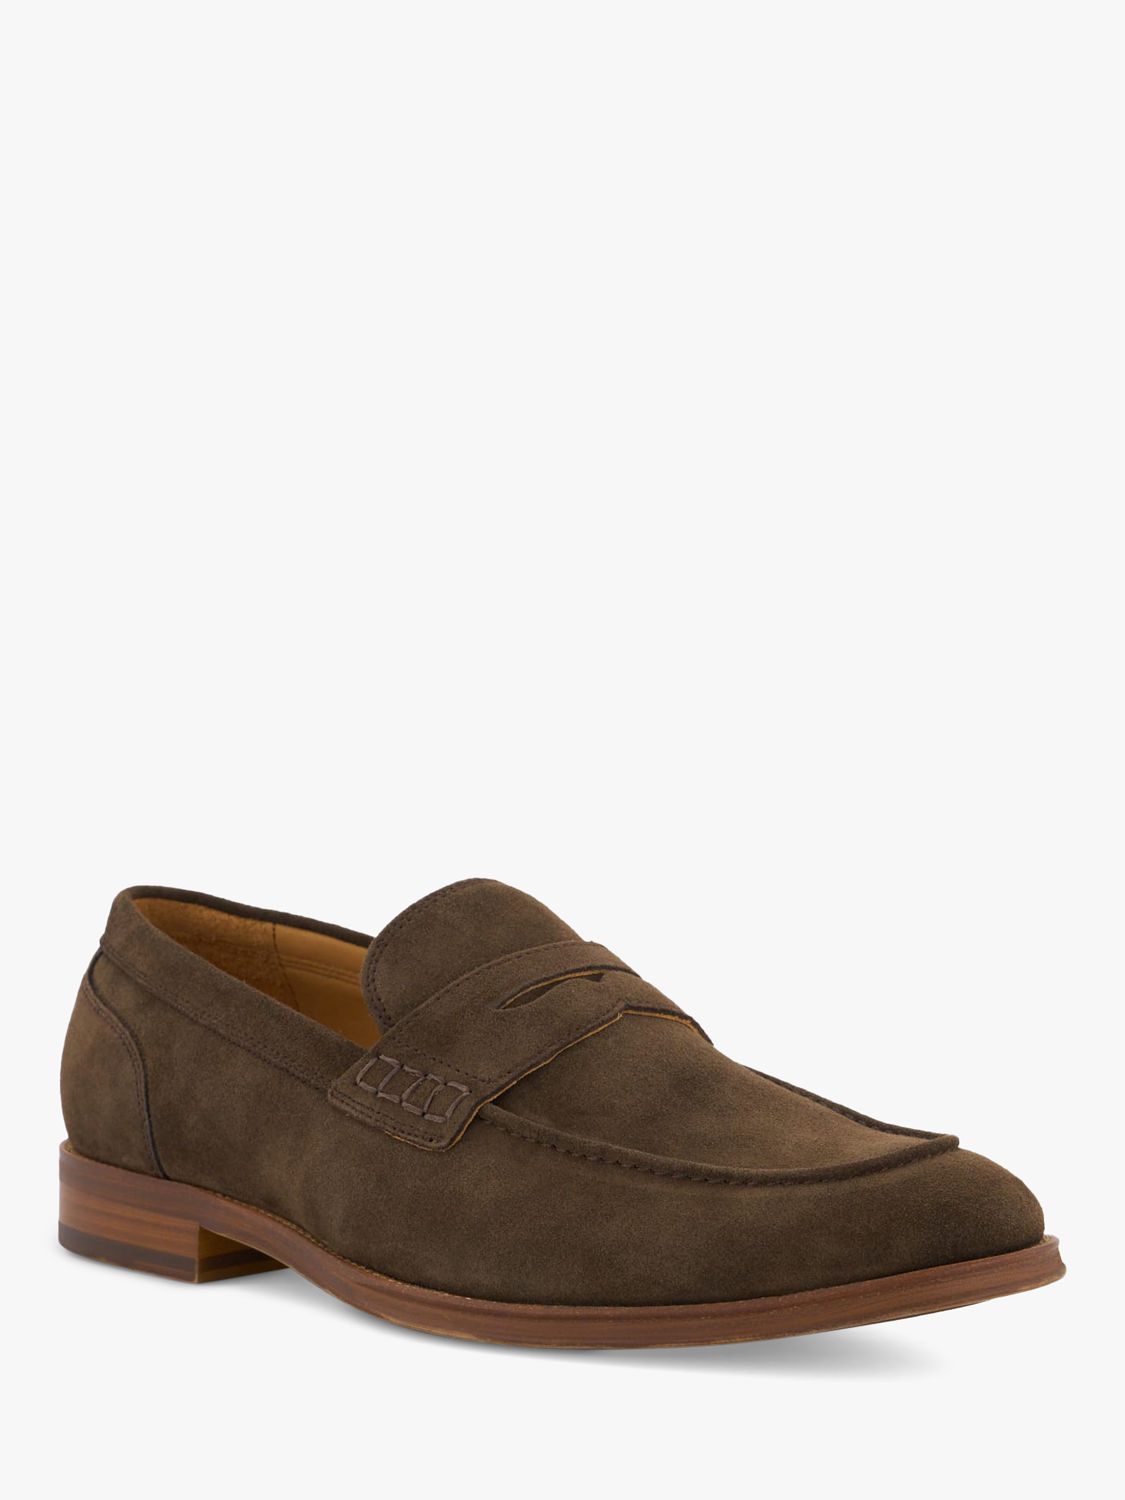 Buy Dune Sulli Suede Moccasin Shoes, Brown Online at johnlewis.com